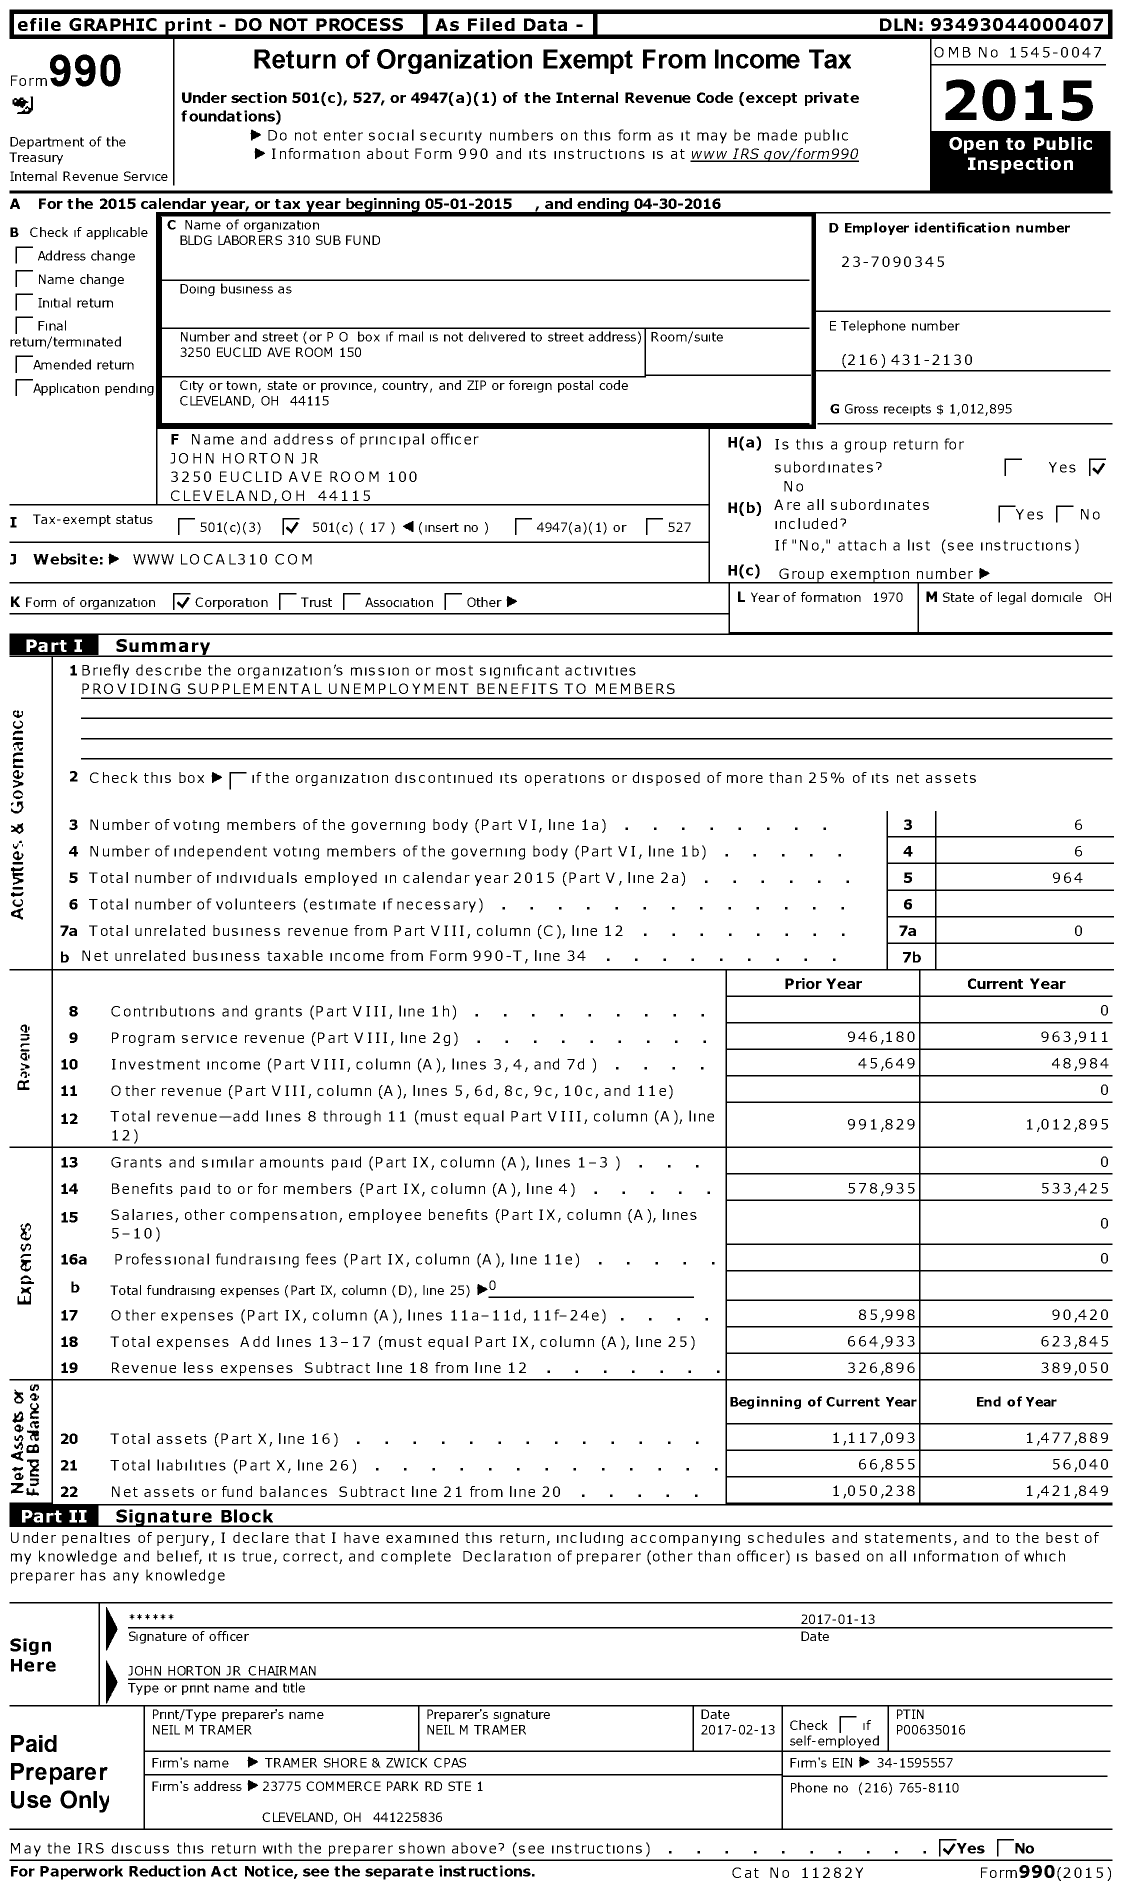 Image of first page of 2015 Form 990O for Bldg Laborers 310 Sub Fund